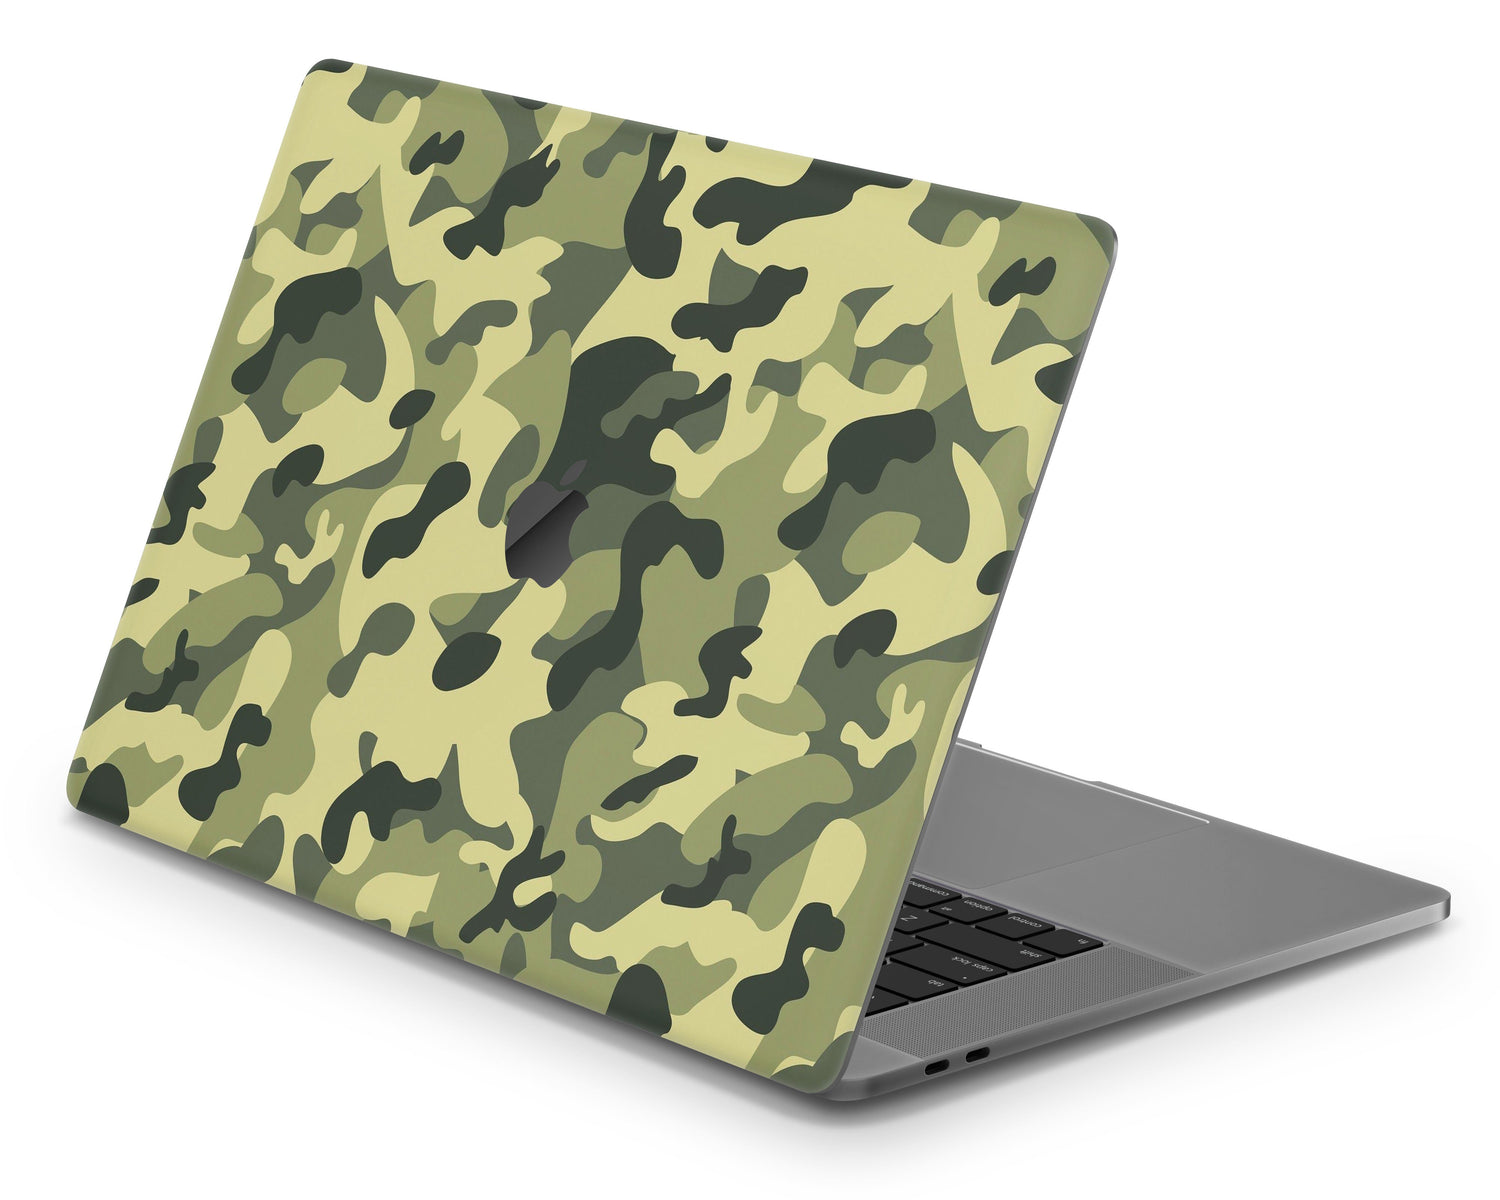 Lux Skins MacBook Camo Green Pro 16" (A2141) Skins - Pattern Abstract Skin